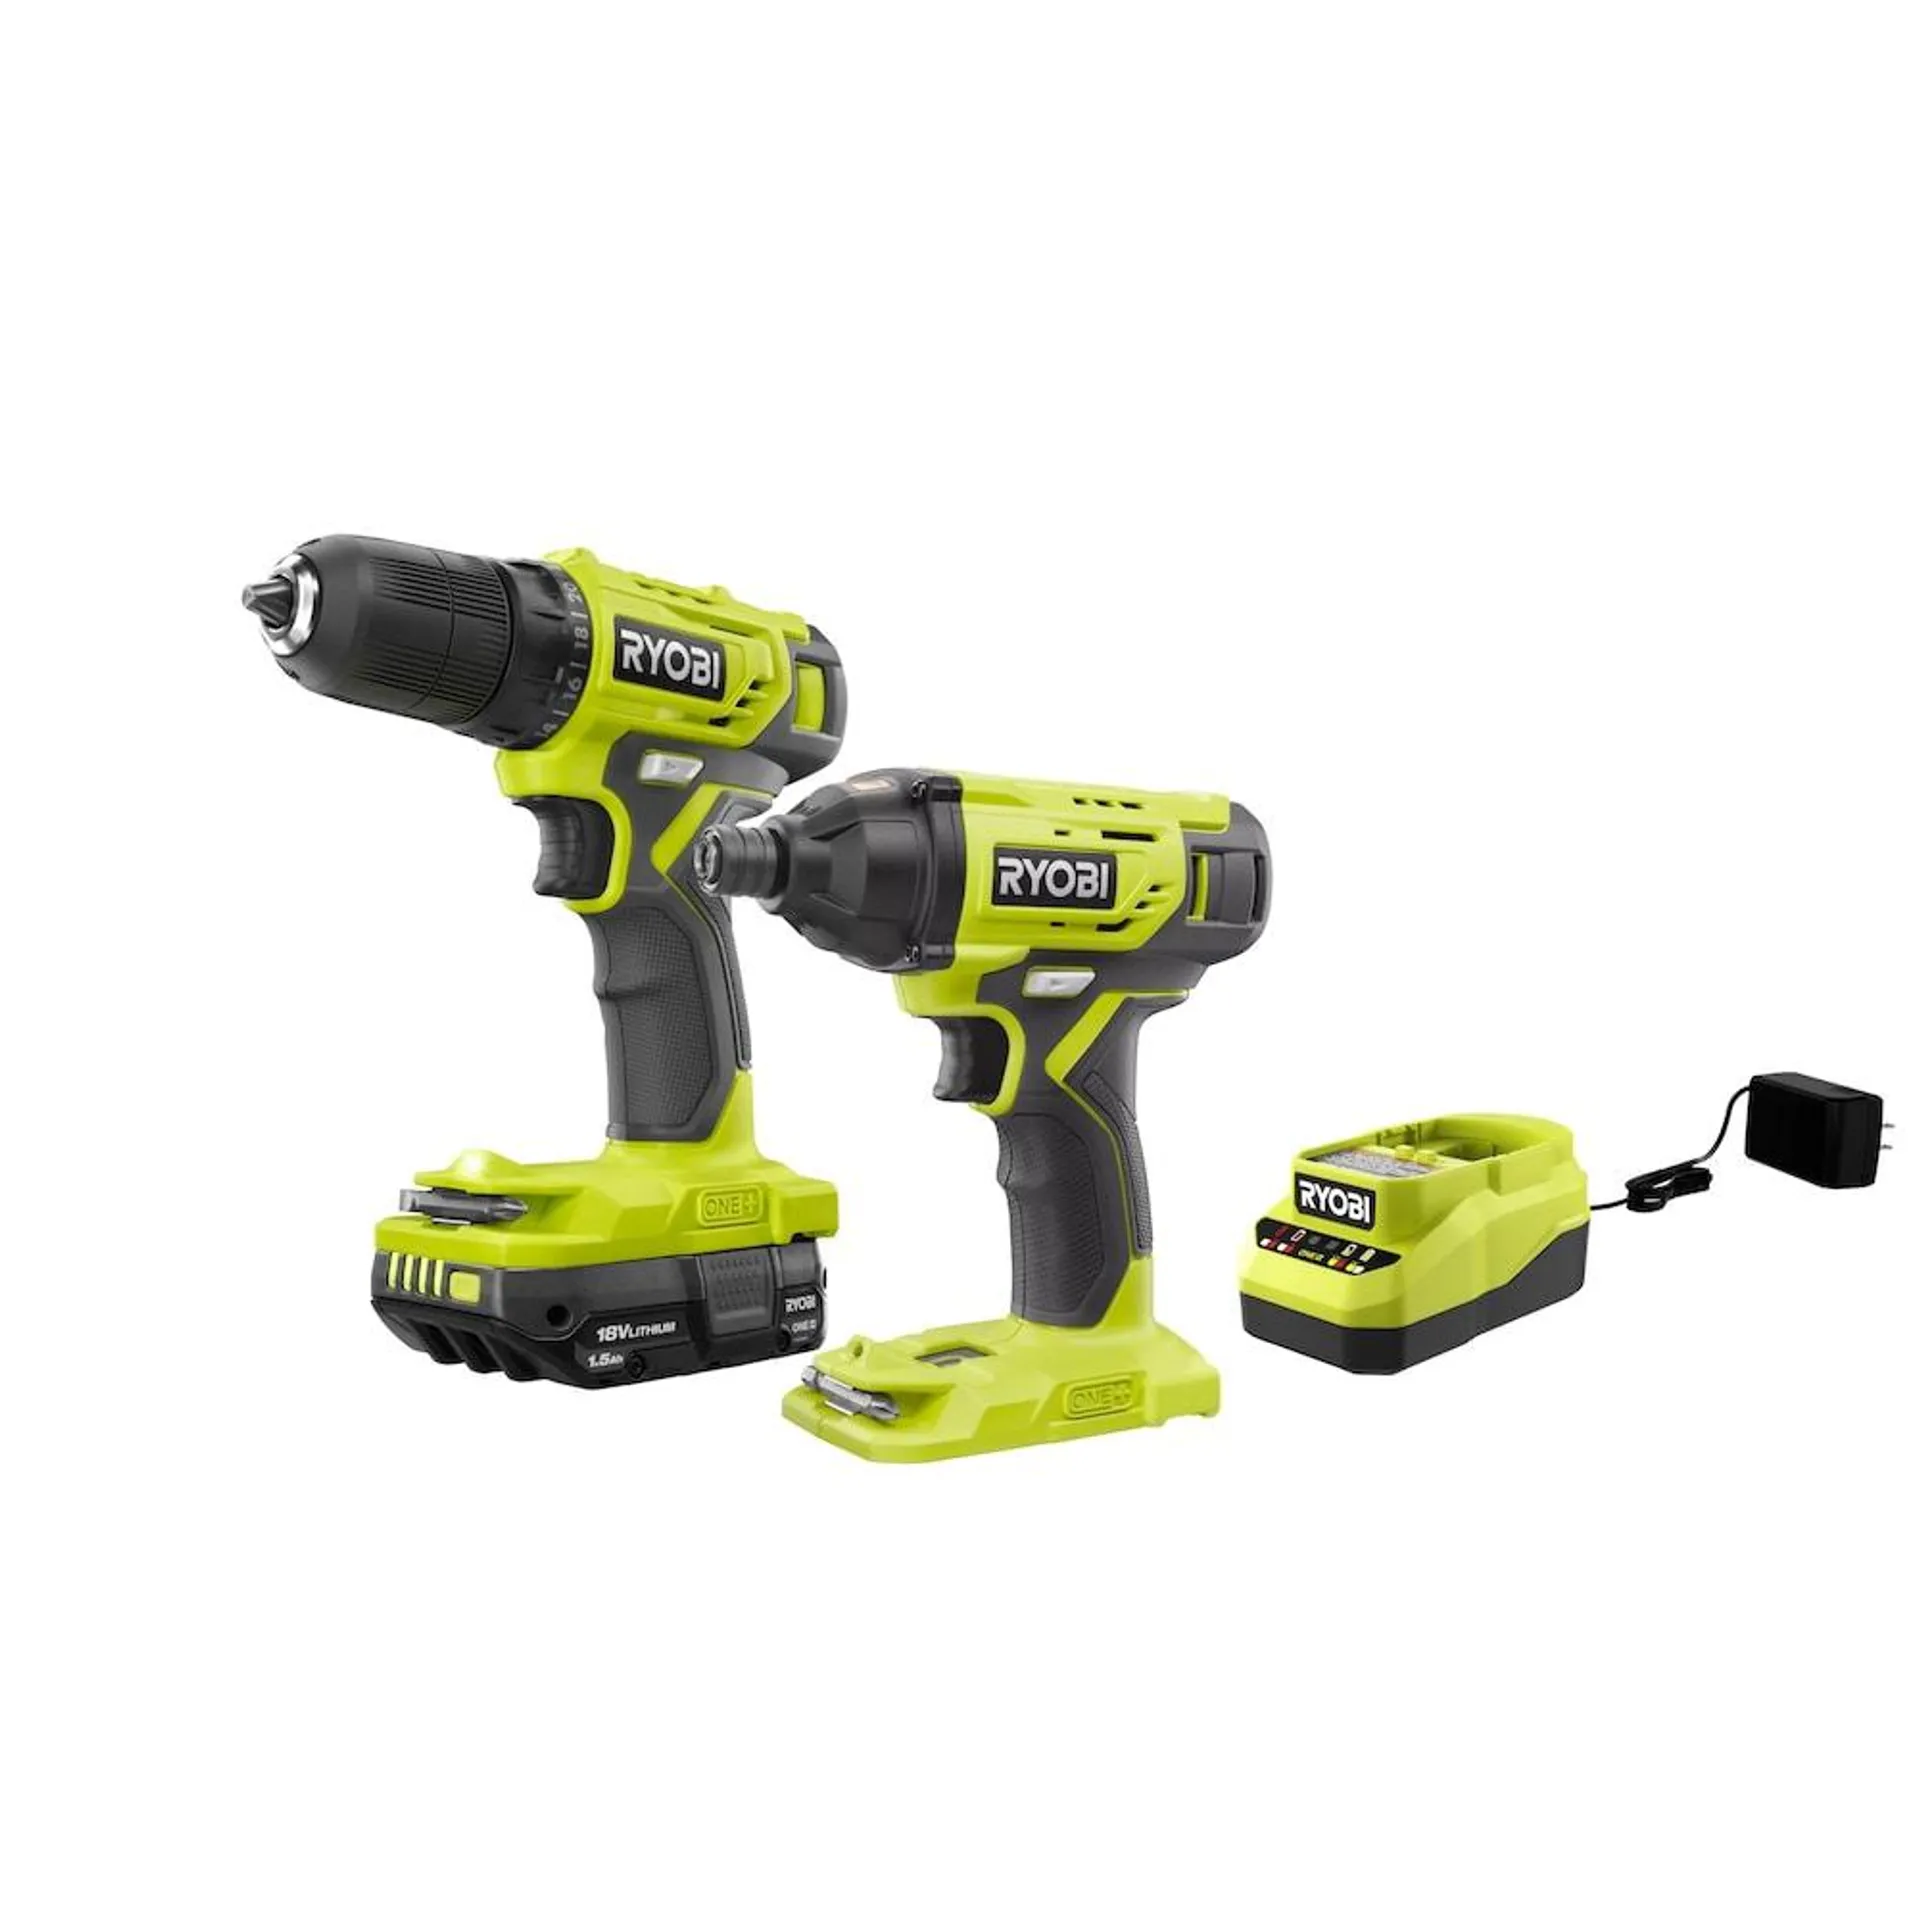 18V ONE+ Drill/Driver and Impact Driver Kit with 1.5 Ah Battery and Charger